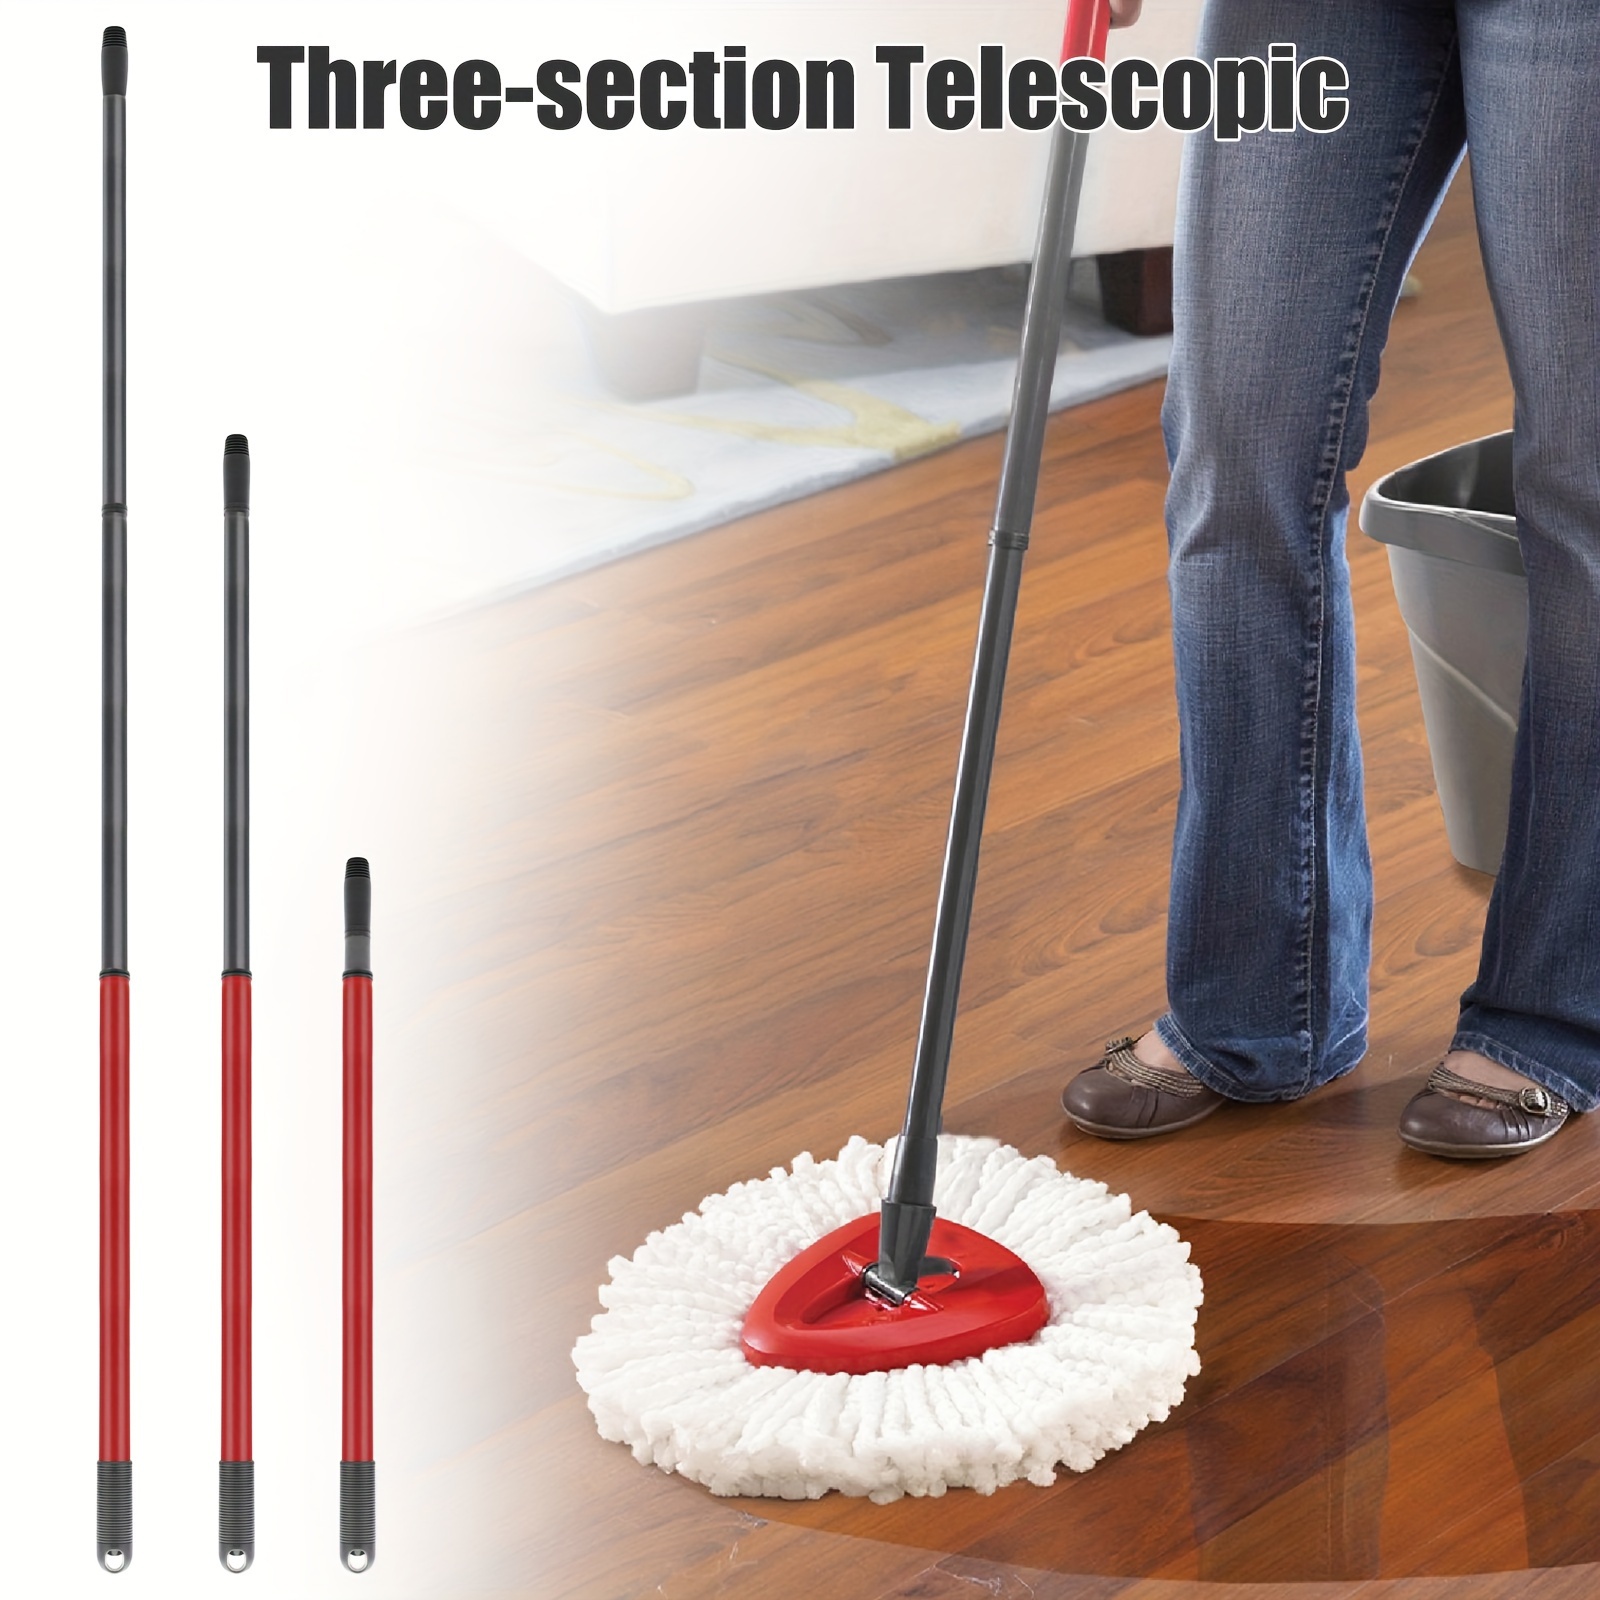 

1pc, 3-section Mop Telescopic Bar, Long Telescopic Spin Mop Rod, Mop Handle Replacement For Easywring, Cleaning Supplies, Cleaning Accessories